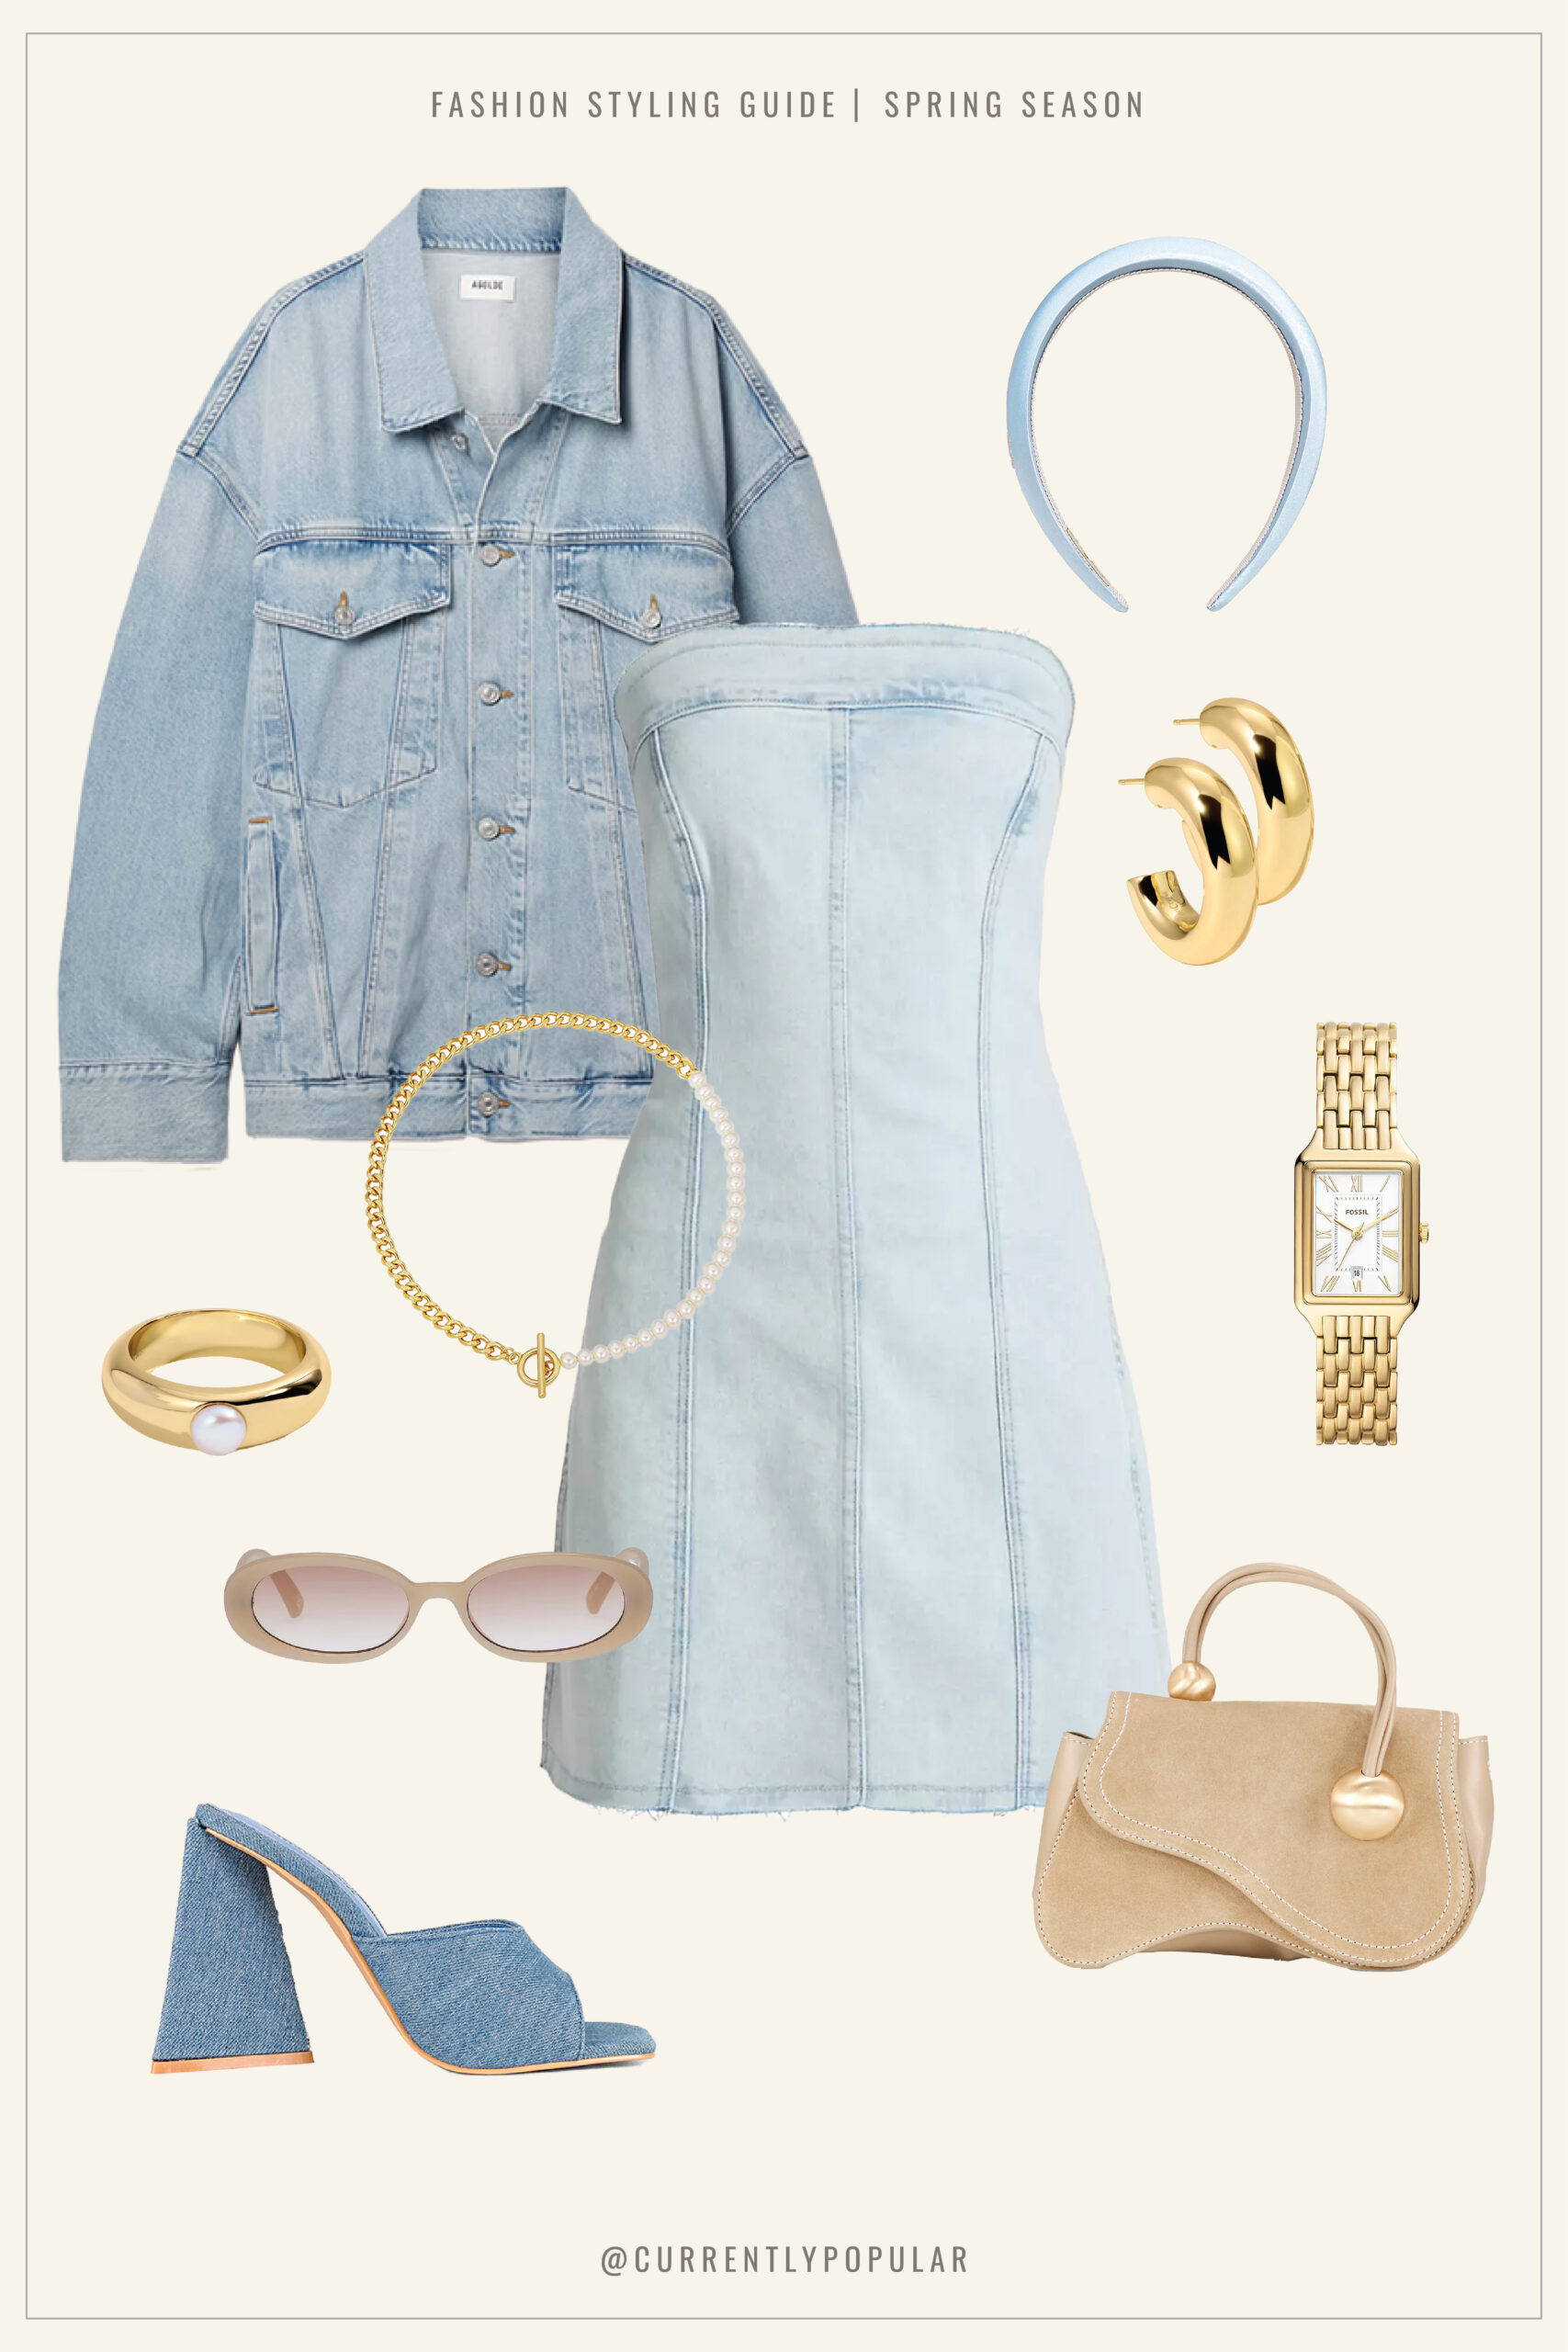 A spring fashion mood board featuring a light blue denim strapless dress and a matching oversized jacket. Accessories include a gold pearl ring and gold necklace, a blue headband, and a pair of gold hoop earrings. The outfit is completed with oval beige sunglasses, denim mules with a high heel, and a small beige handbag with round handles. This ensemble combines classic denim with elegant gold accents for a fresh, stylish springtime look.